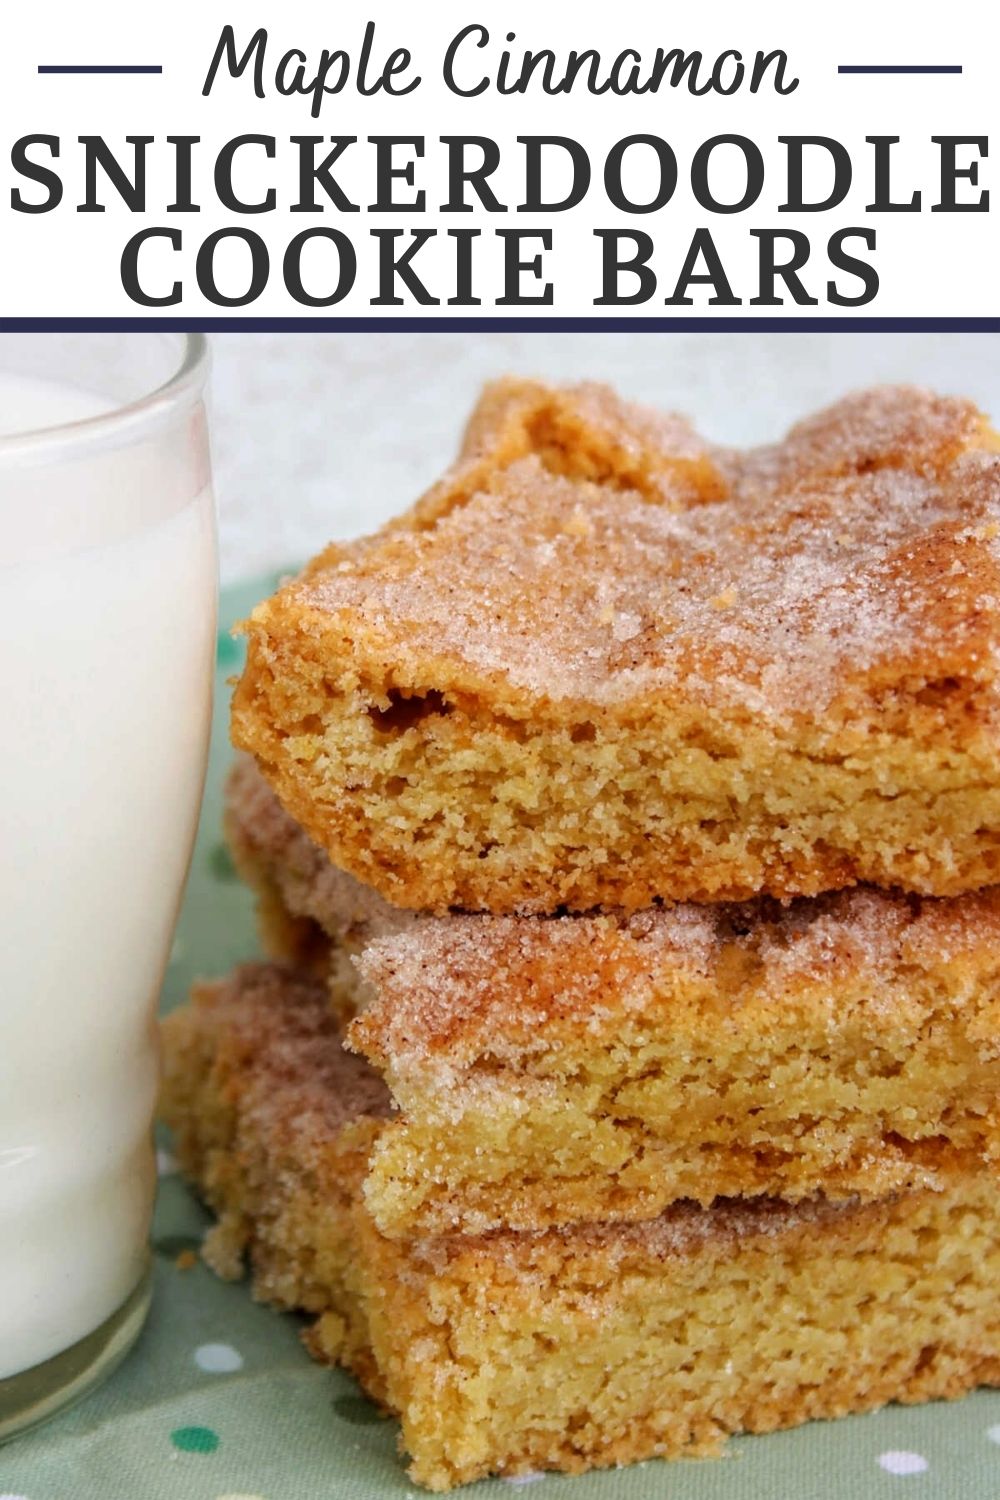 Make your cinnamon sugar dreams come true even faster with these snickerdoodle cookie bars. They have everything you love about the classic cookie in a quick and easy bar form.